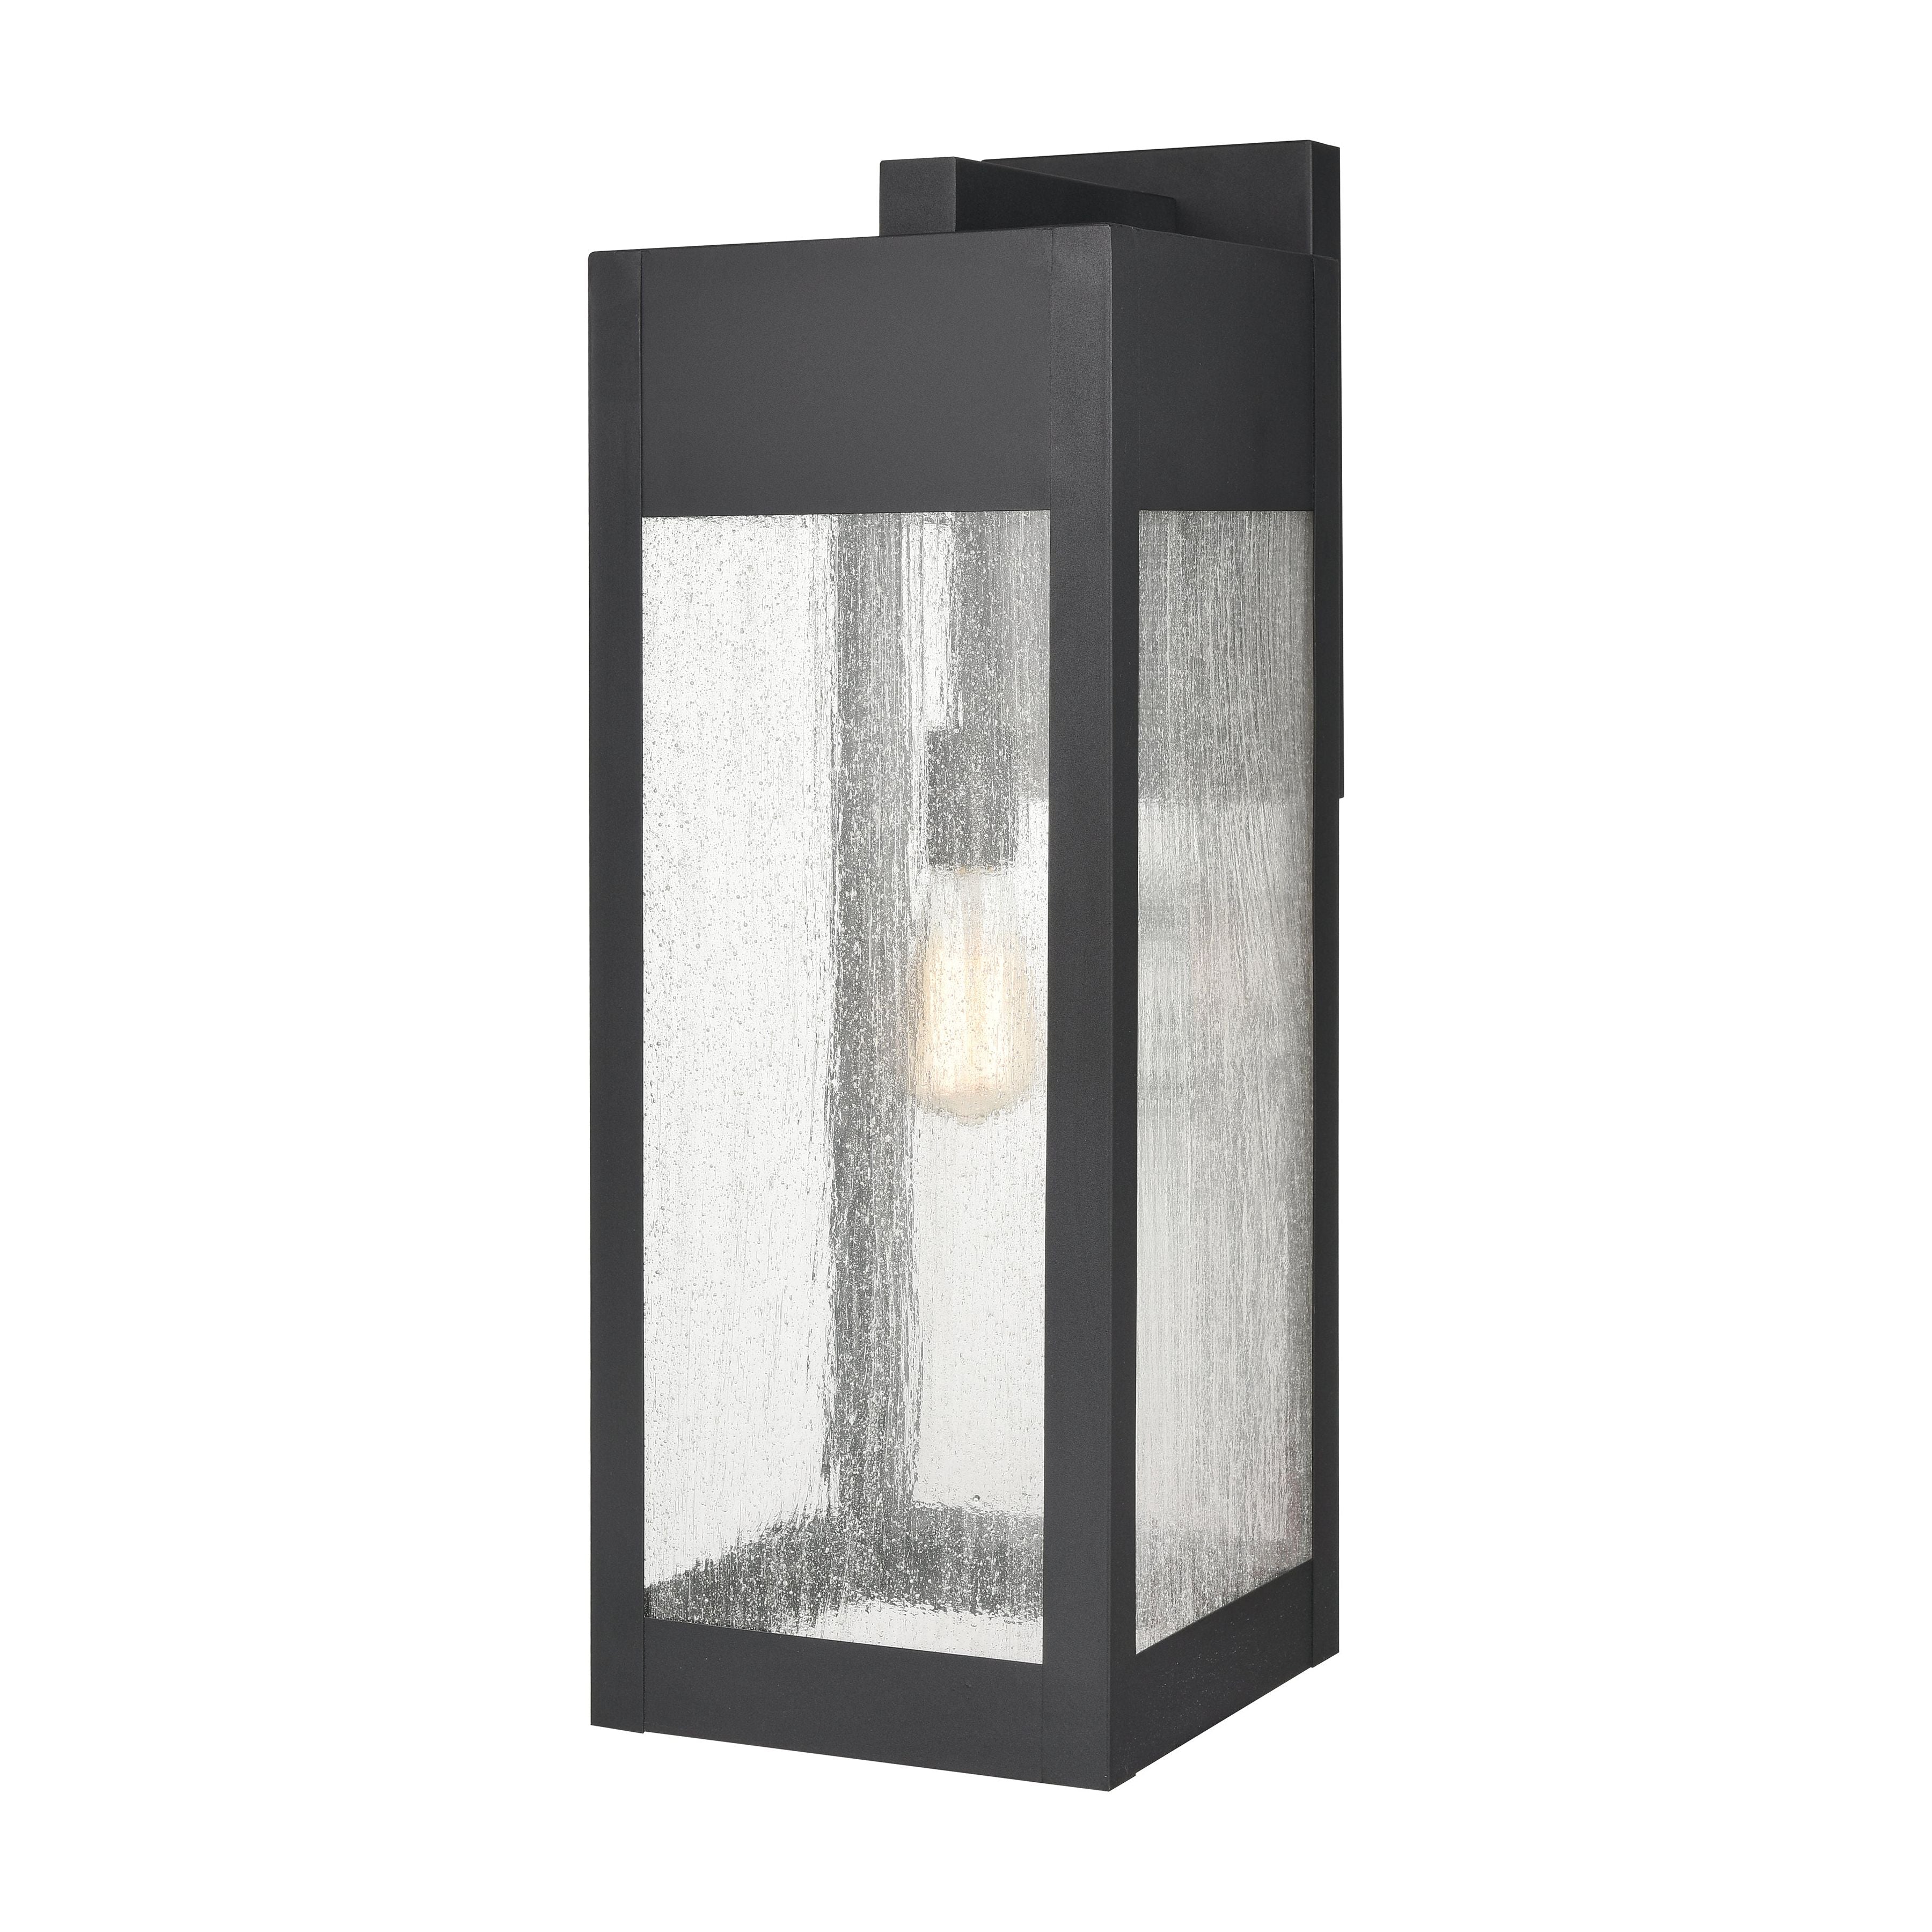 Angus 26.25" High 1-Light Outdoor Sconce